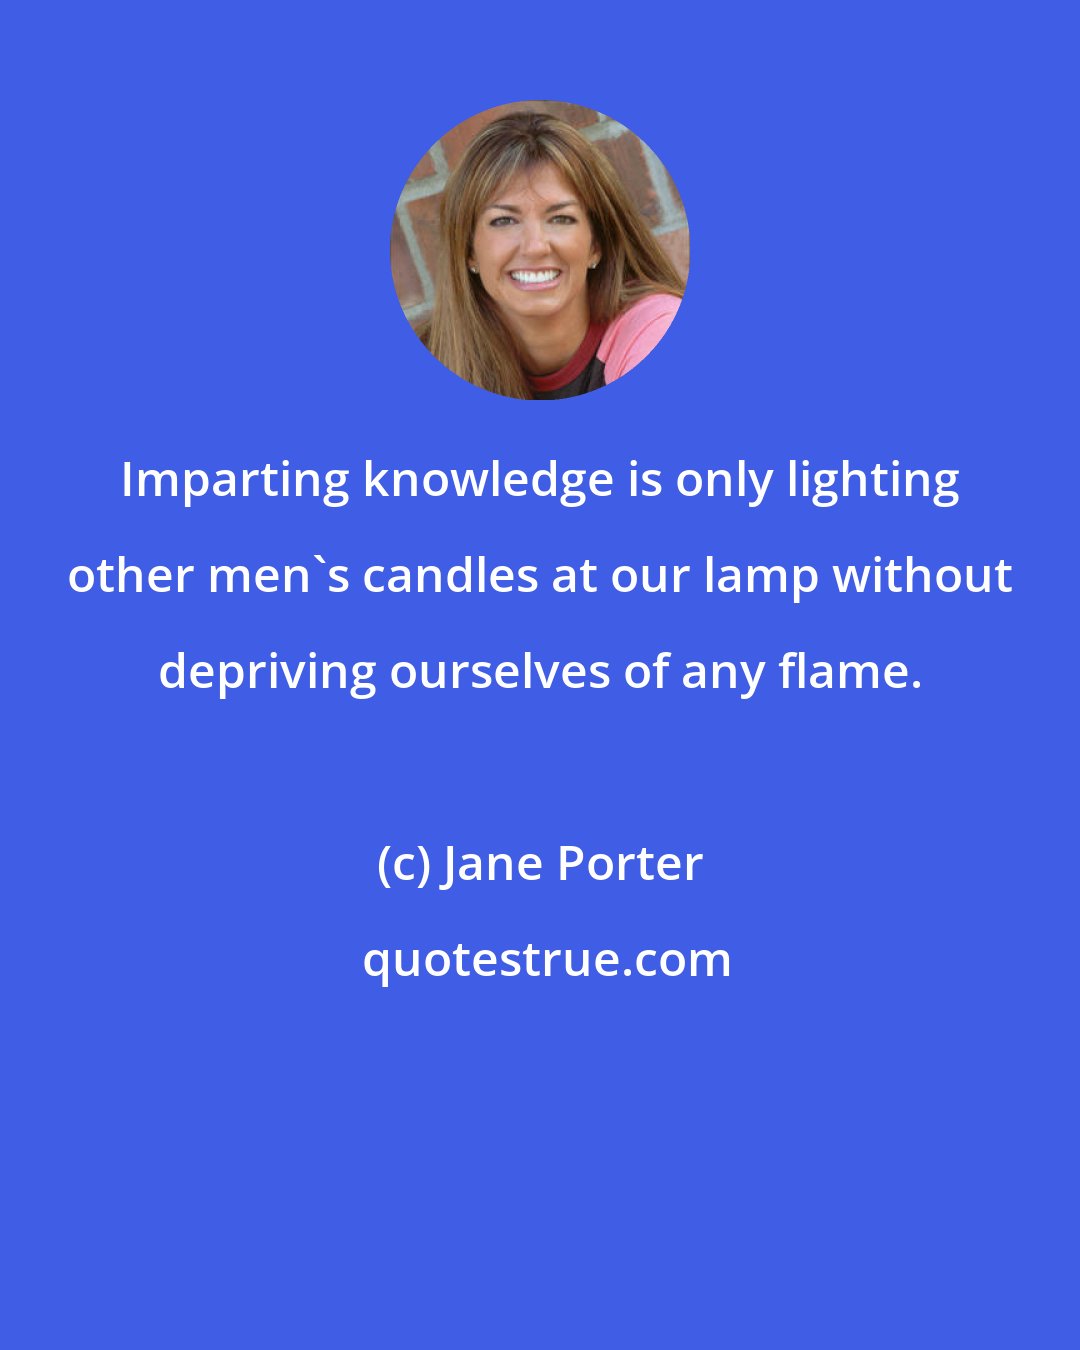 Jane Porter: Imparting knowledge is only lighting other men's candles at our lamp without depriving ourselves of any flame.